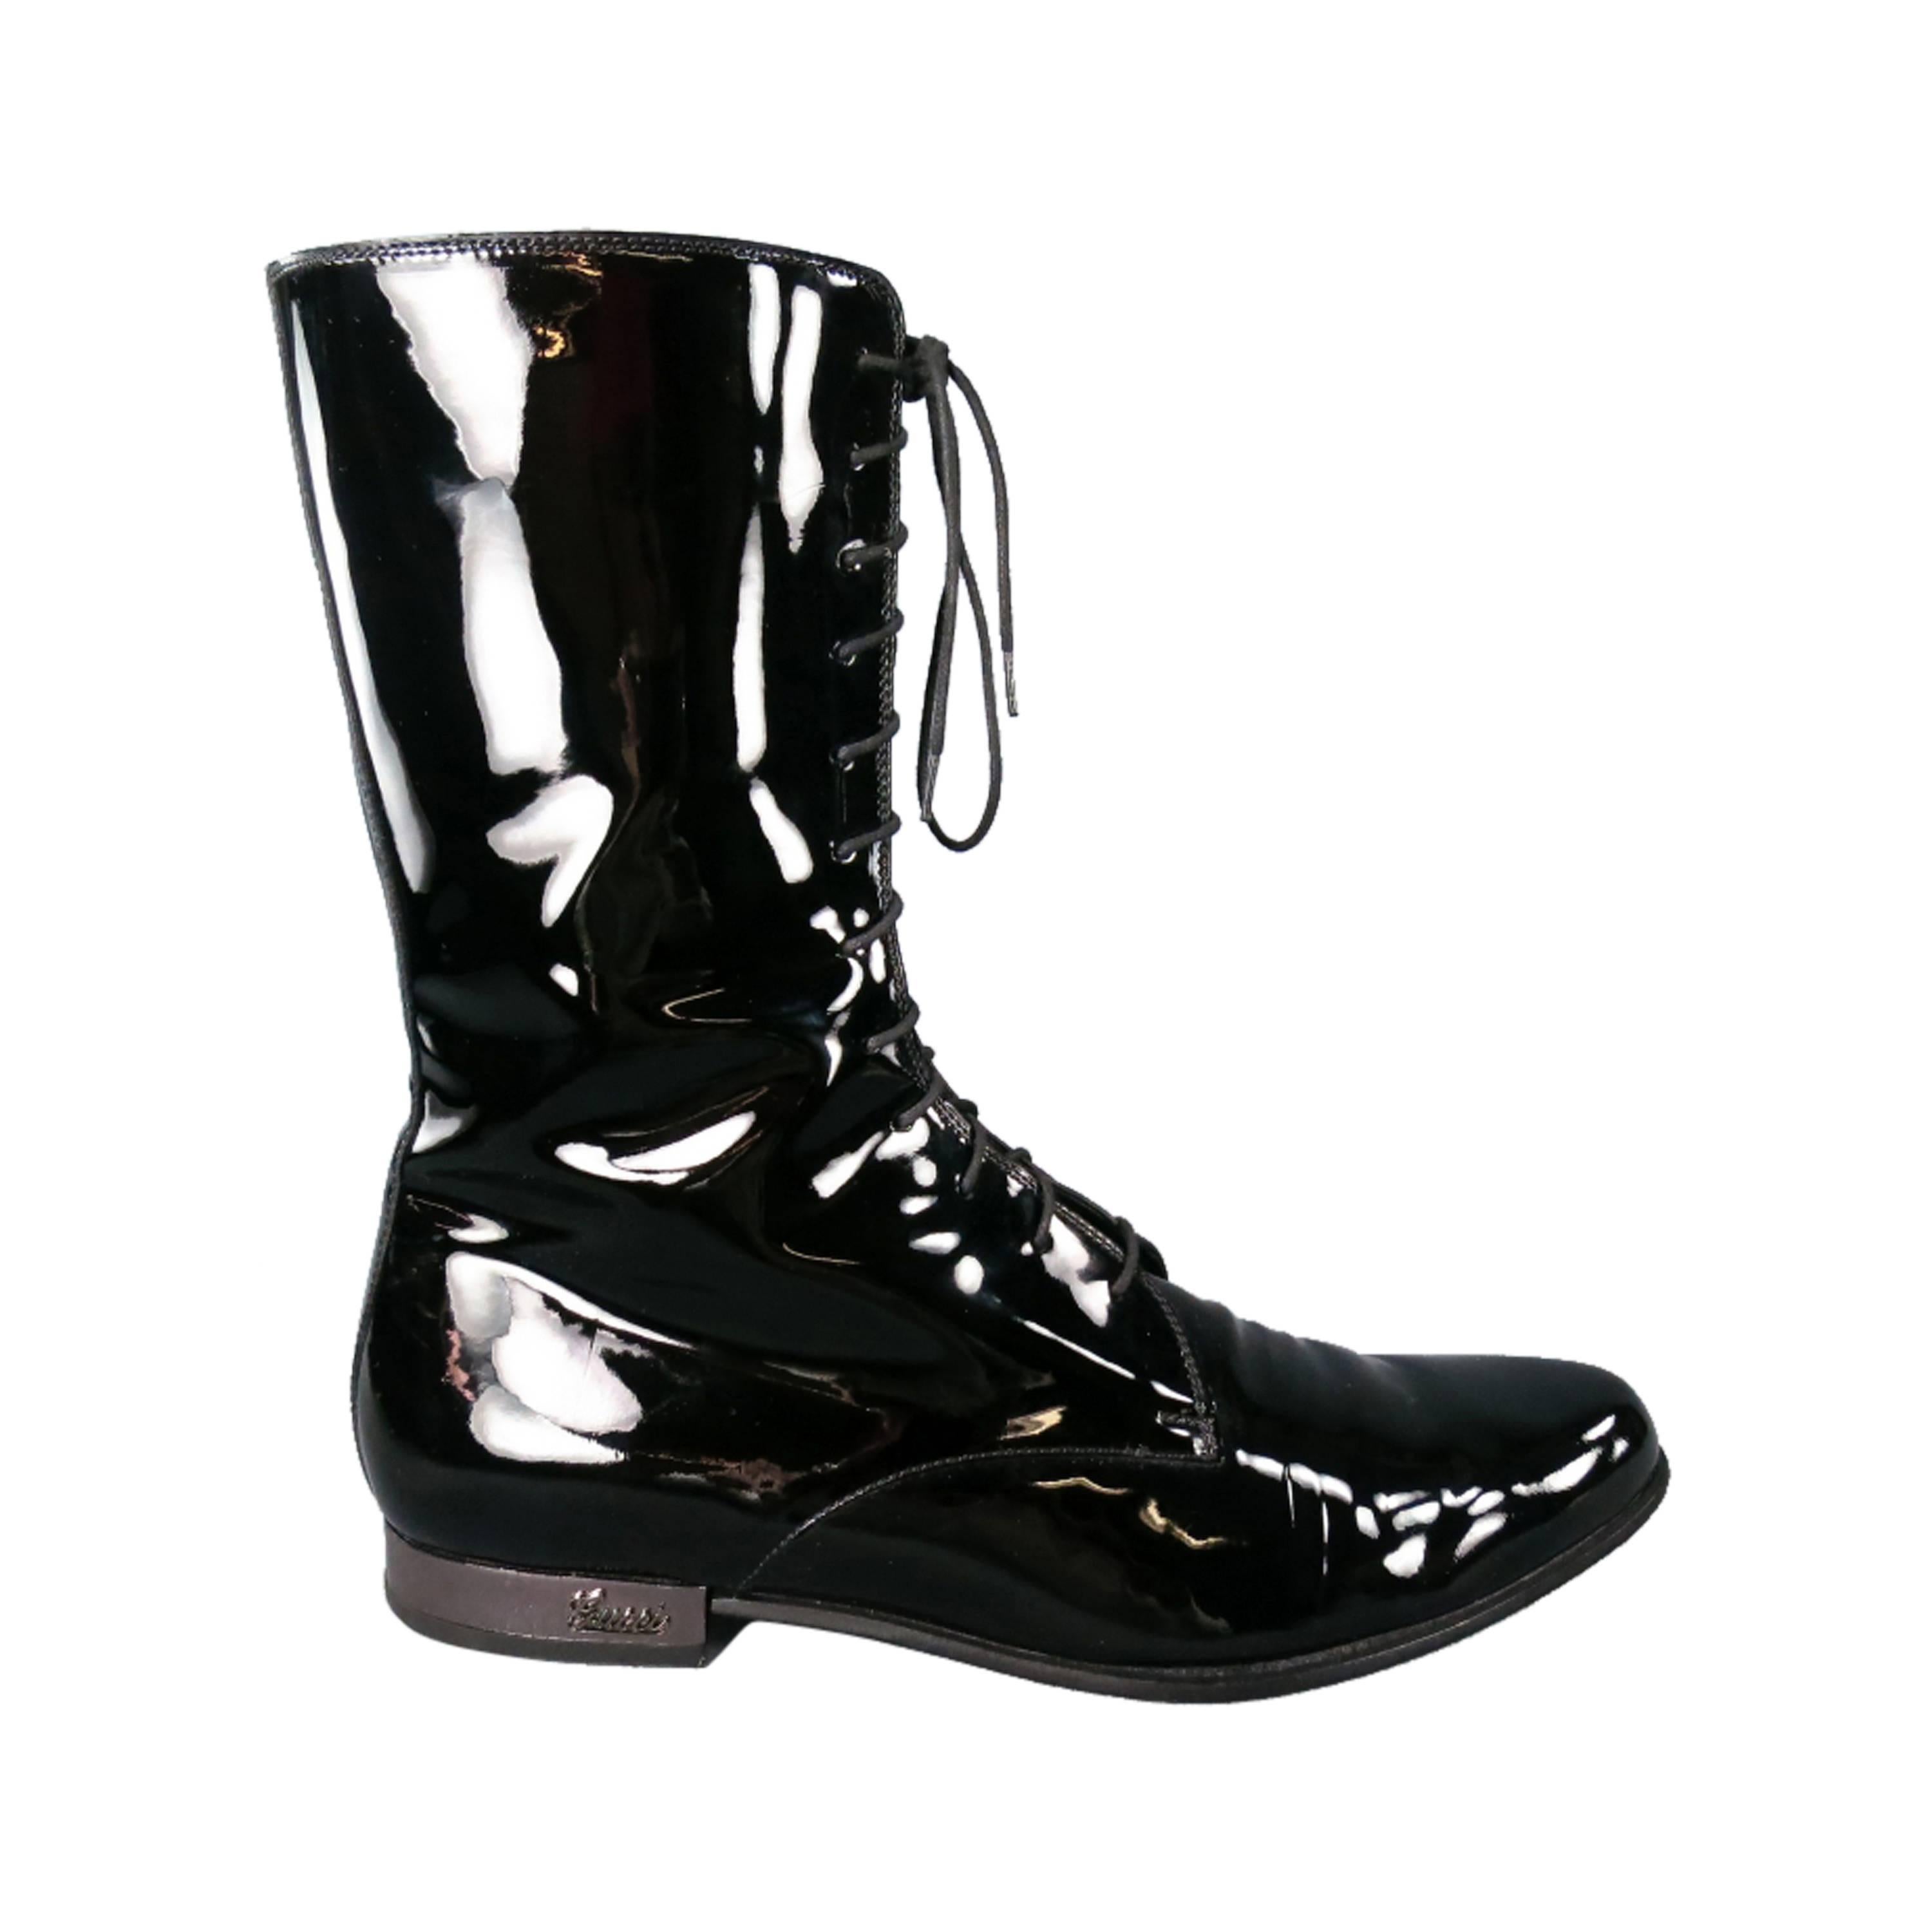 GUCCI Size 9.5 Black Patent Leather High Collar Lace Up / Zipper Boots